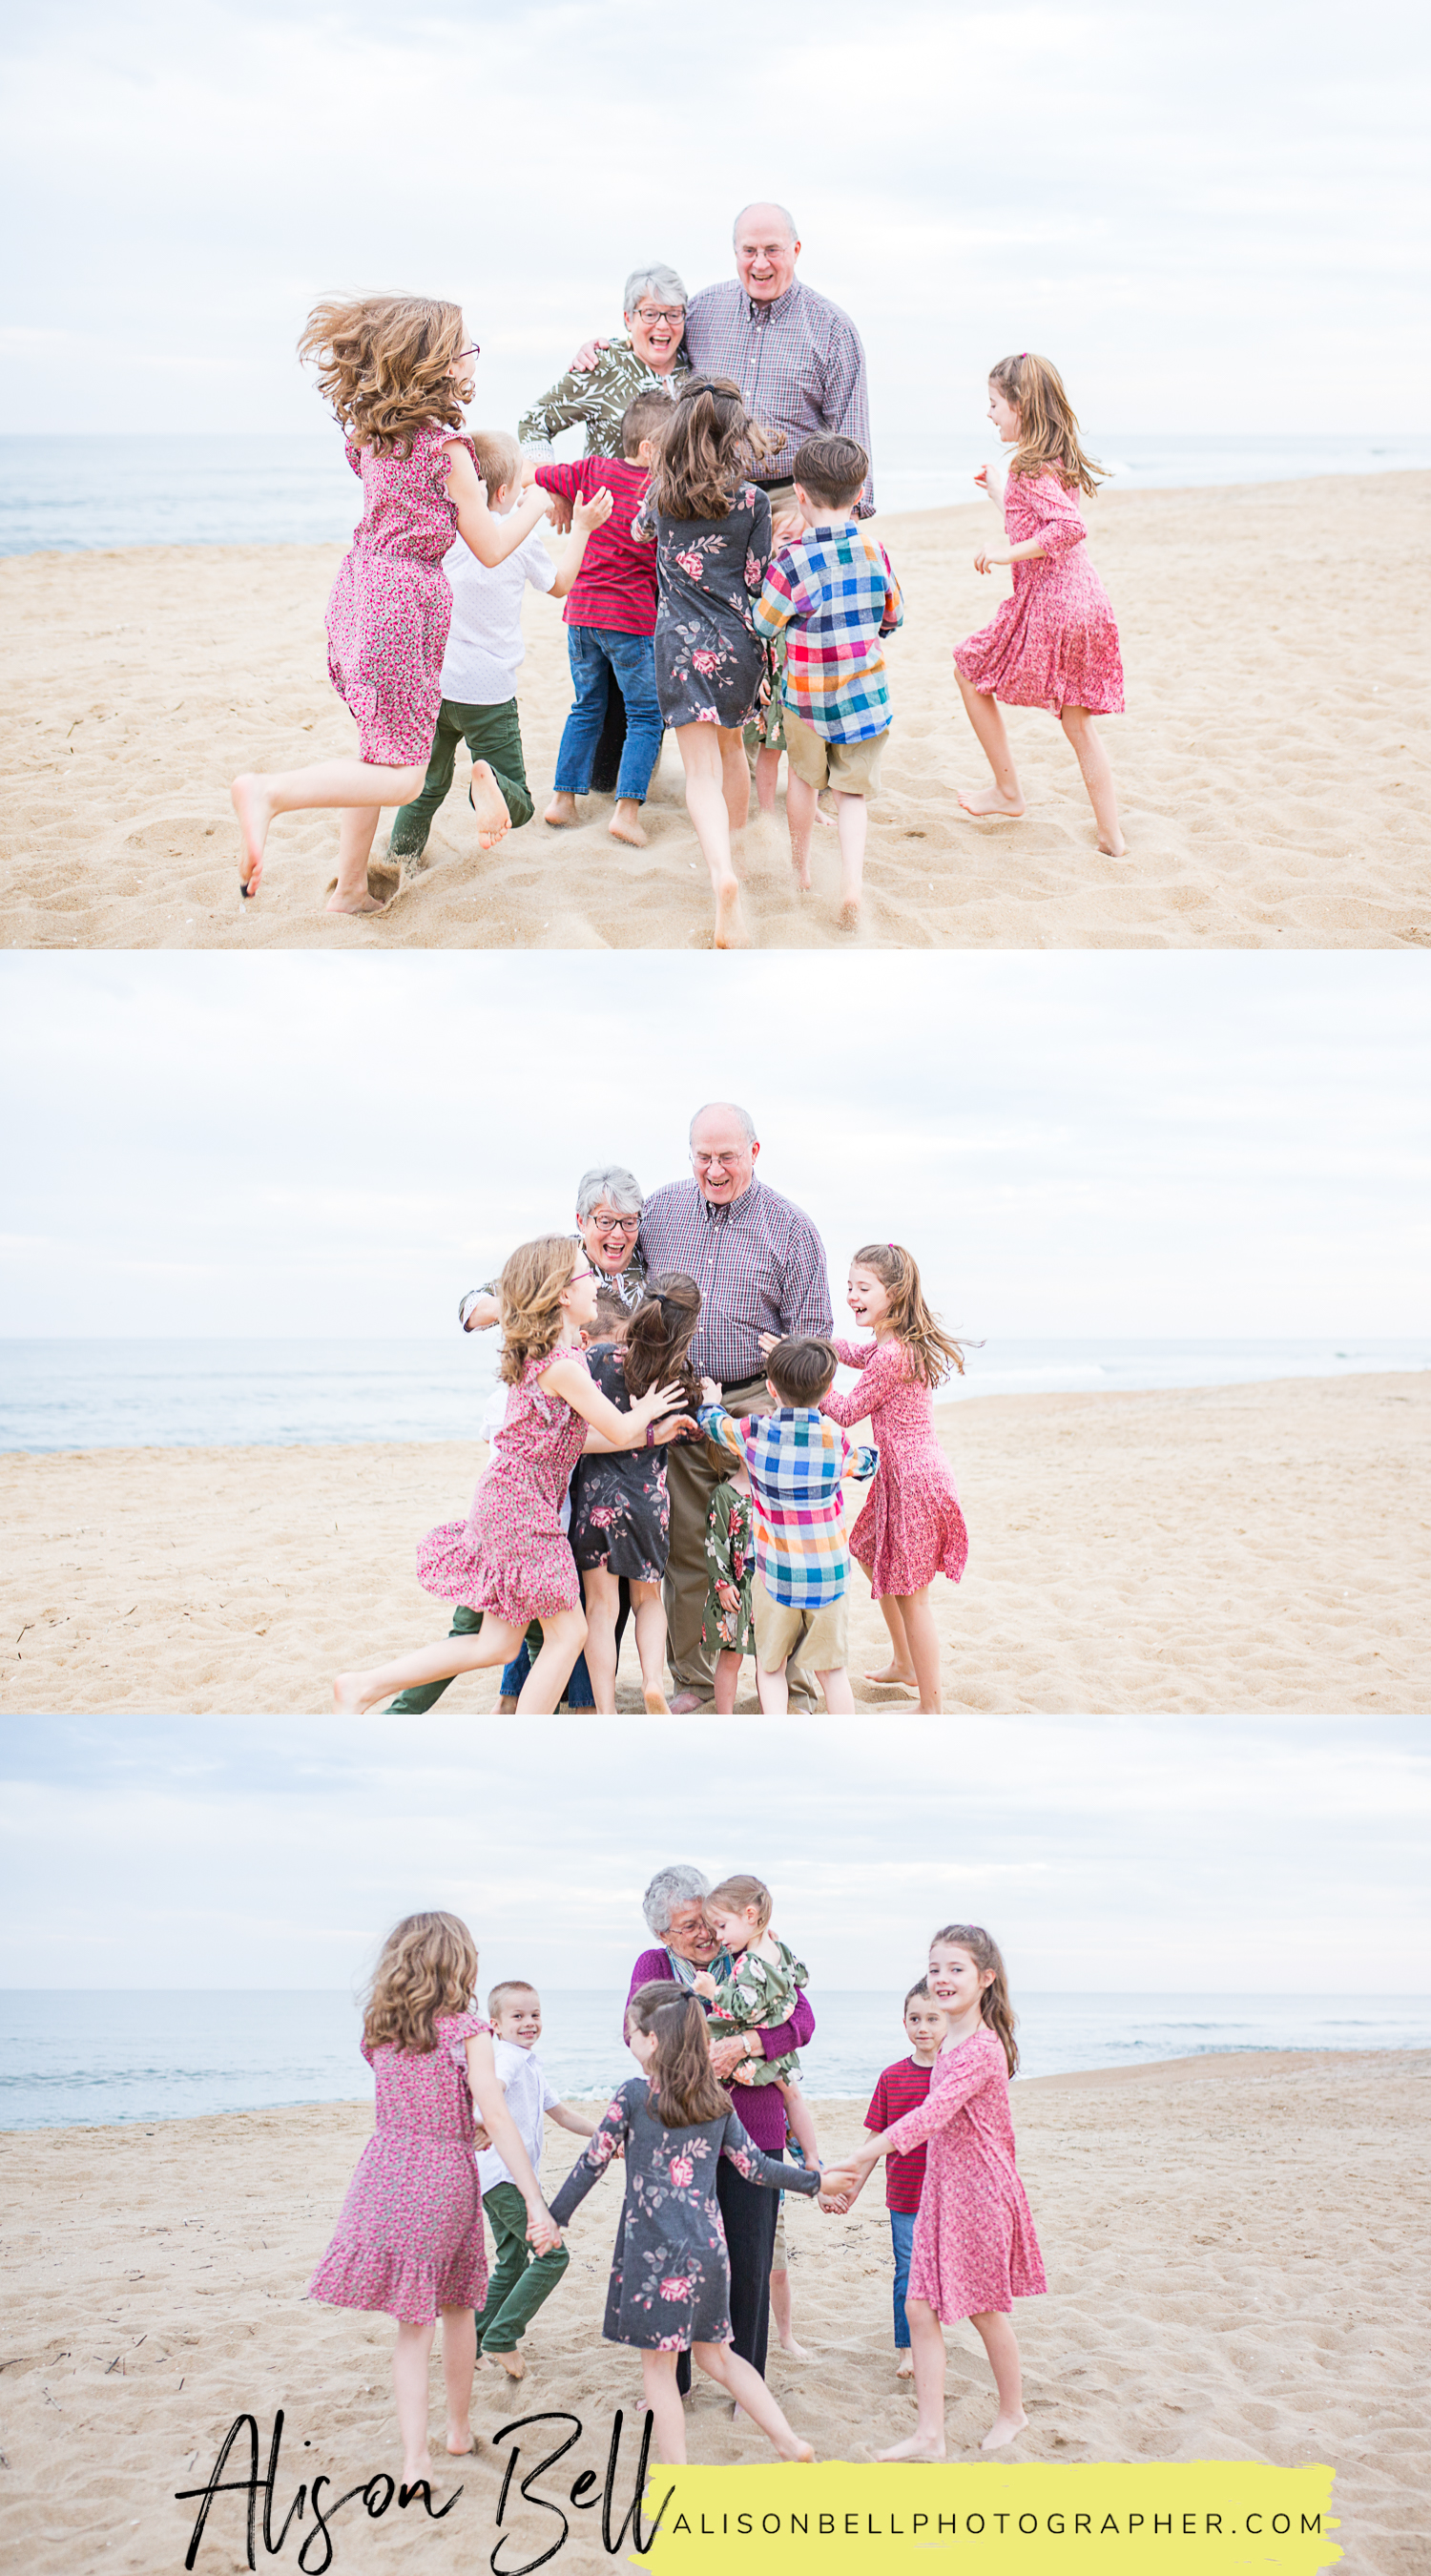 Virginia beach family photographer for extended beach photo sessions by alison bell photographer